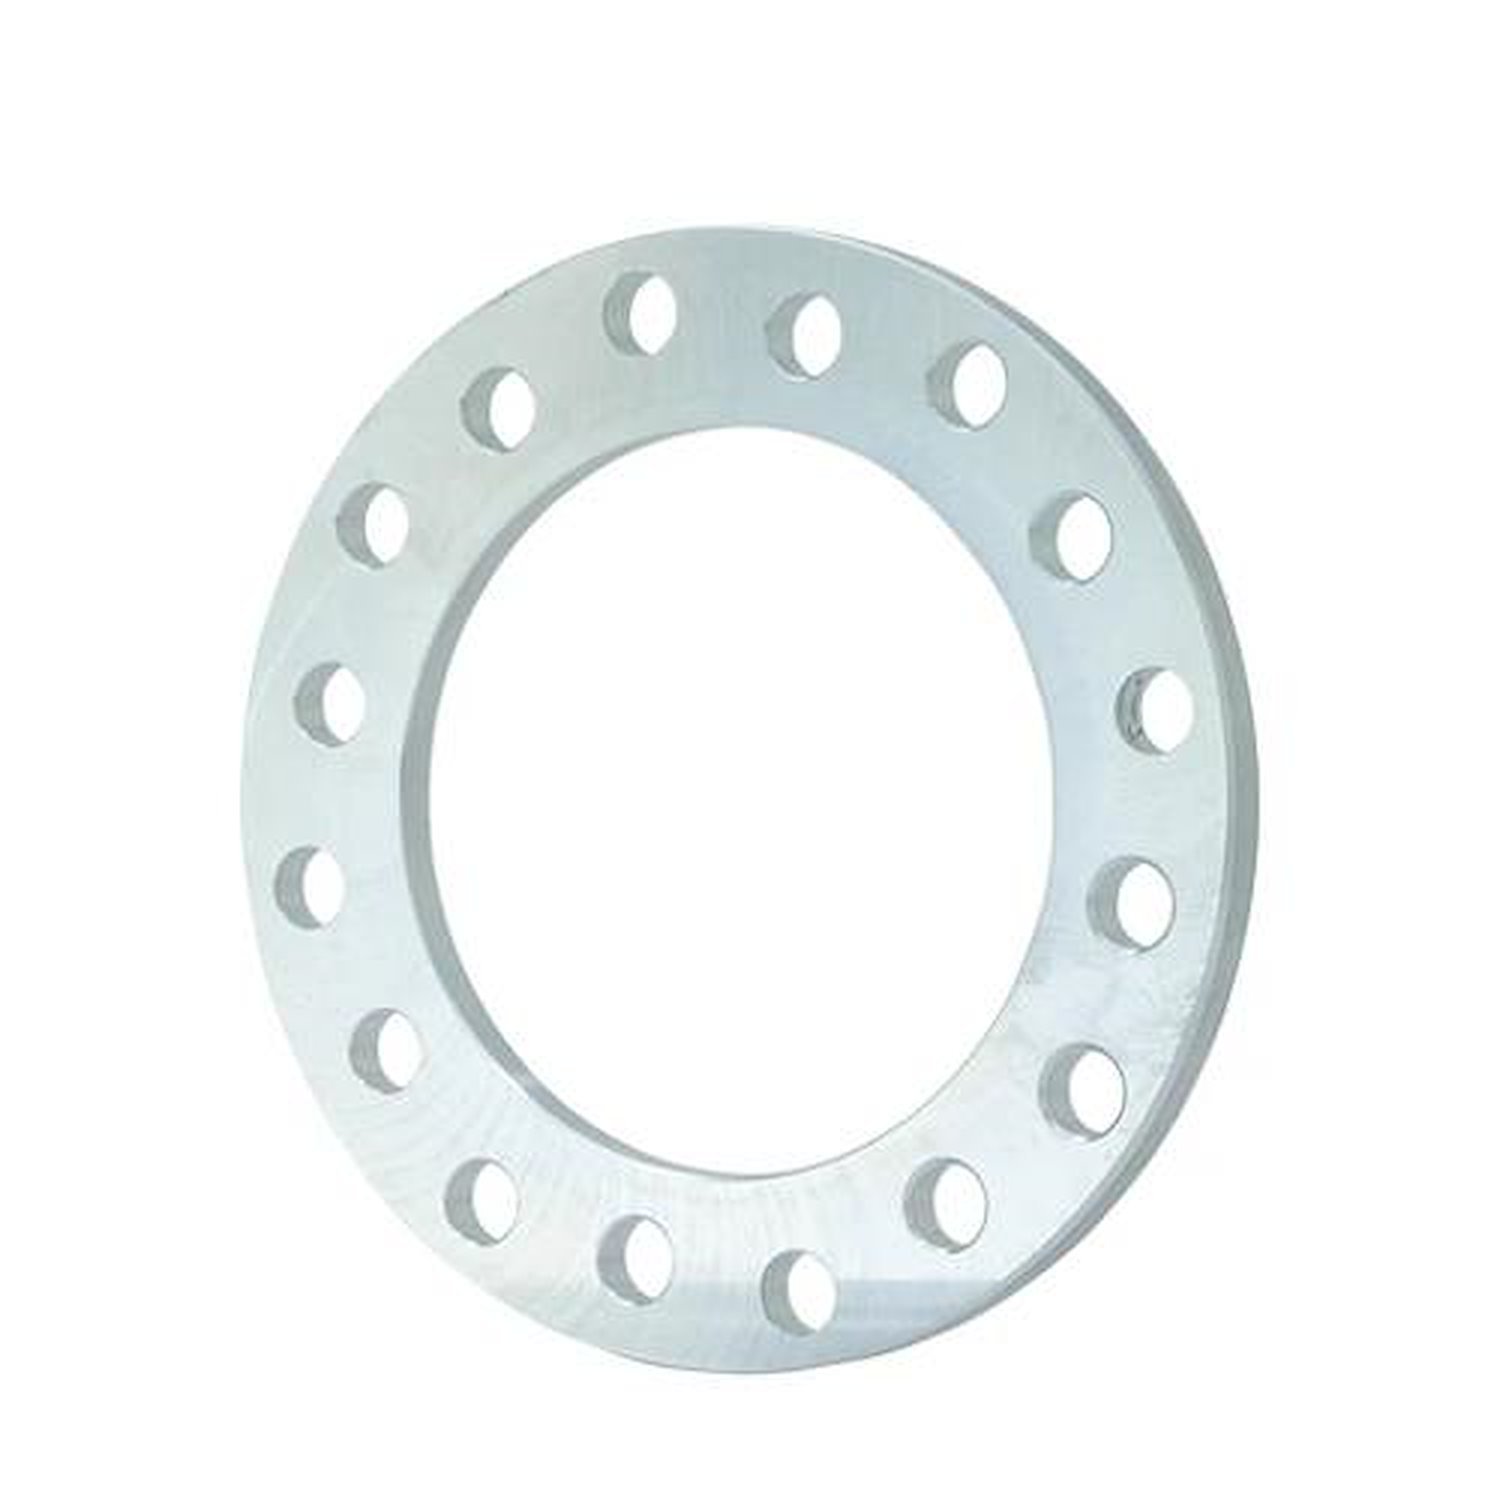 SP608 Wheel Spacer, 8 x 200/210, 1/2" Thick